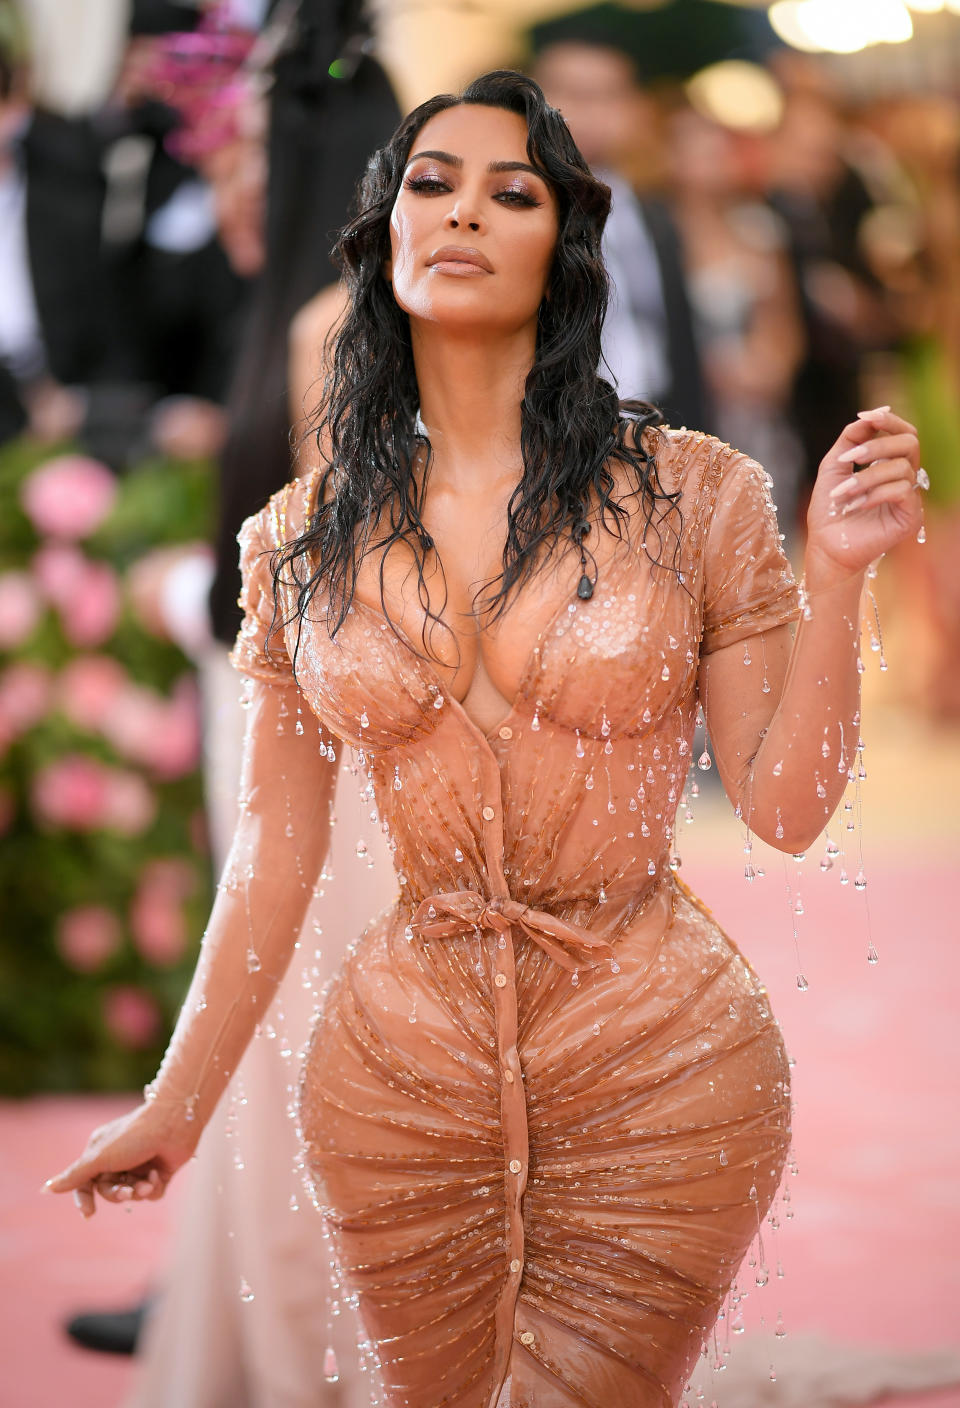 thierry mugler, sheer dresses trend, see-through style outfit fashion trends, NEW YORK, NEW YORK - MAY 06: Kim Kardashian West attends The 2019 Met Gala Celebrating Camp: Notes on Fashion at Metropolitan Museum of Art on May 06, 2019 in New York City. (Photo by Neilson Barnard/Getty Images)